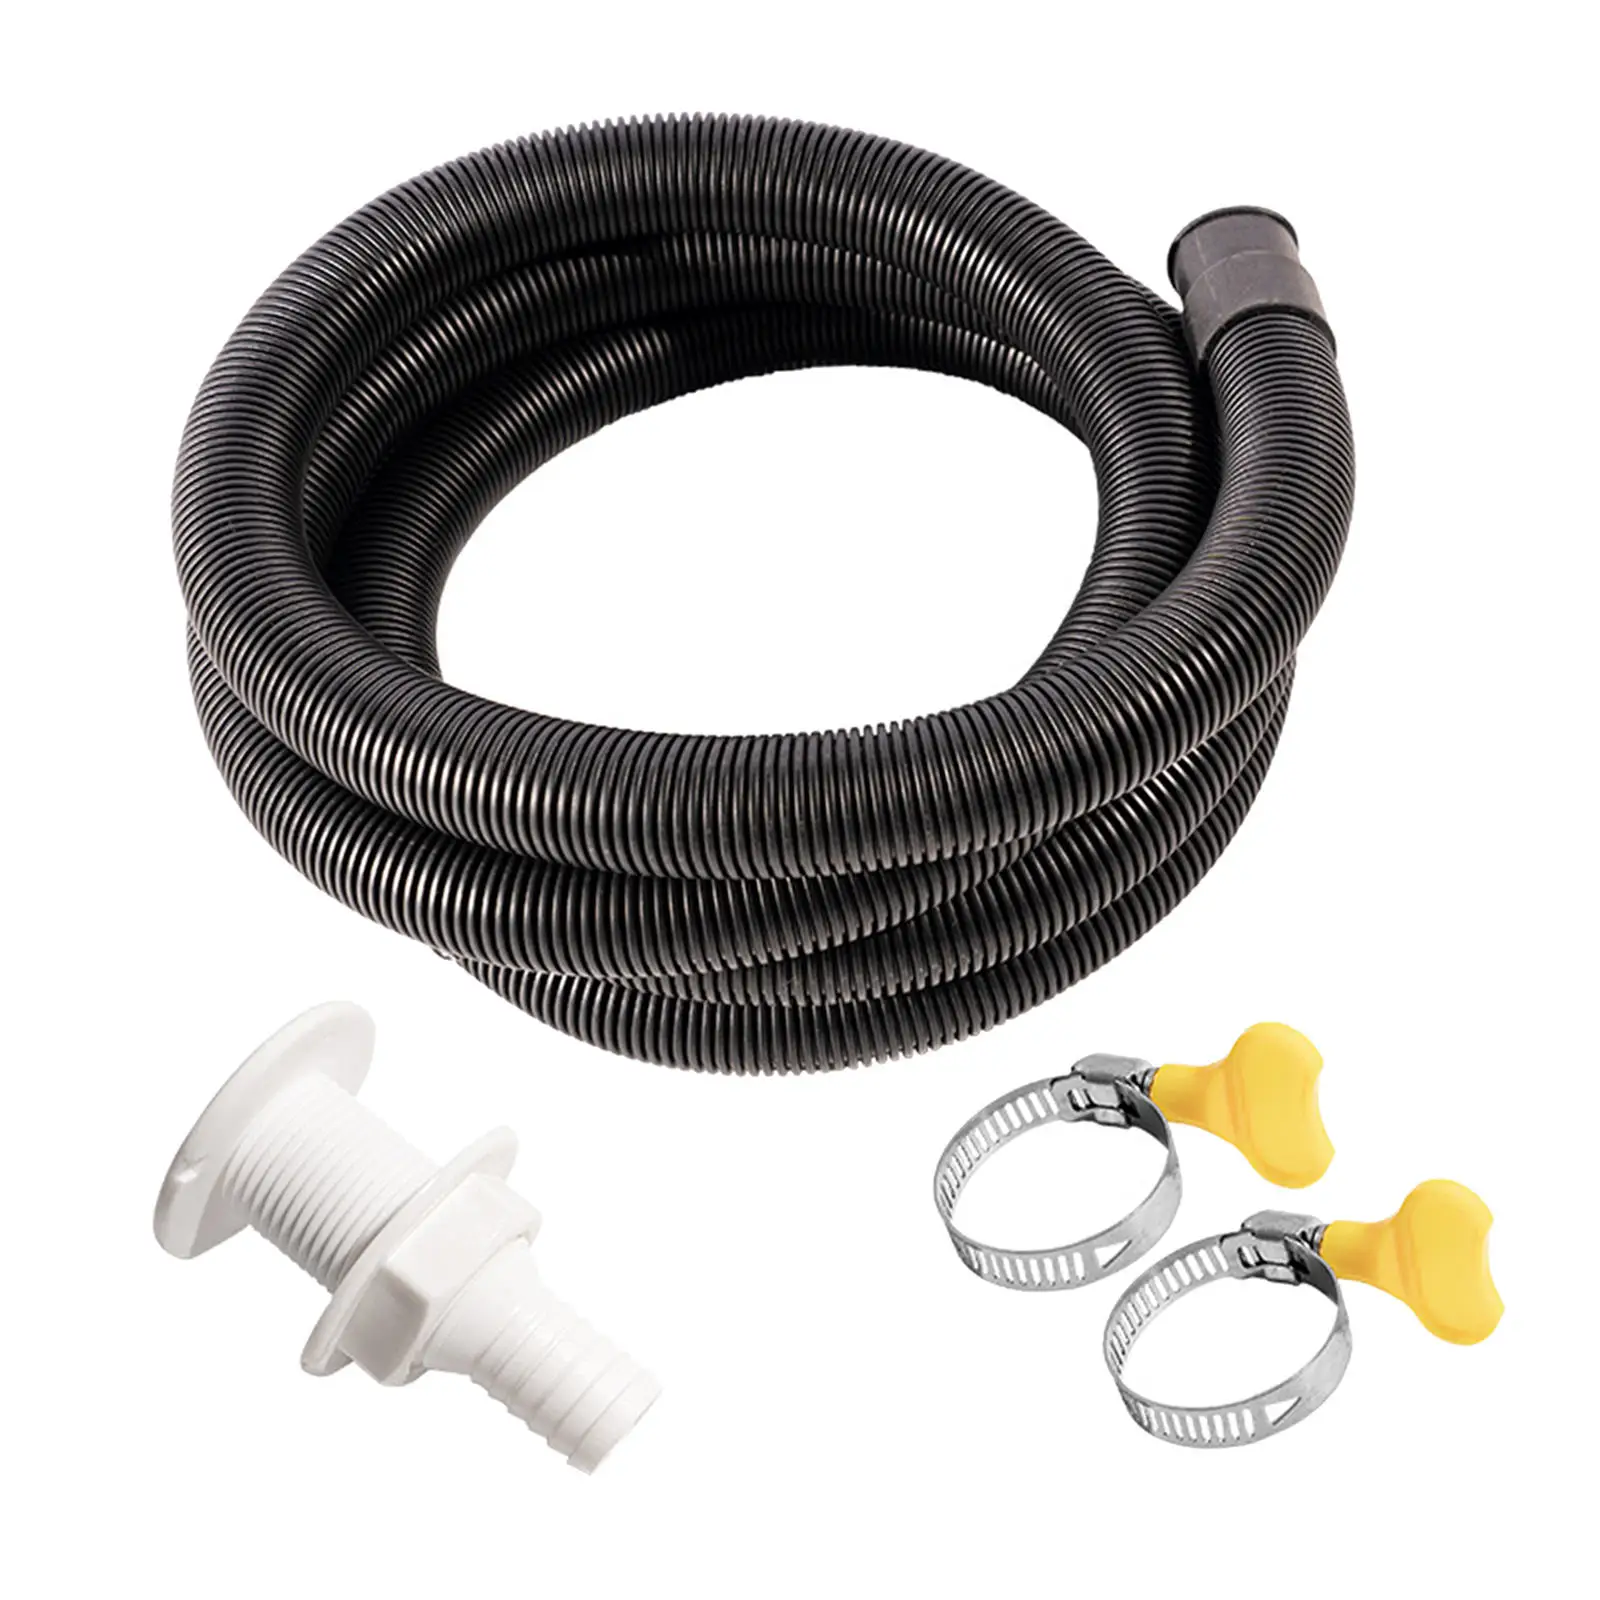 Marine Bilge Pump Plumbing Kit 6.6 FT with 2 Clamps and Thru-Hull Fitting